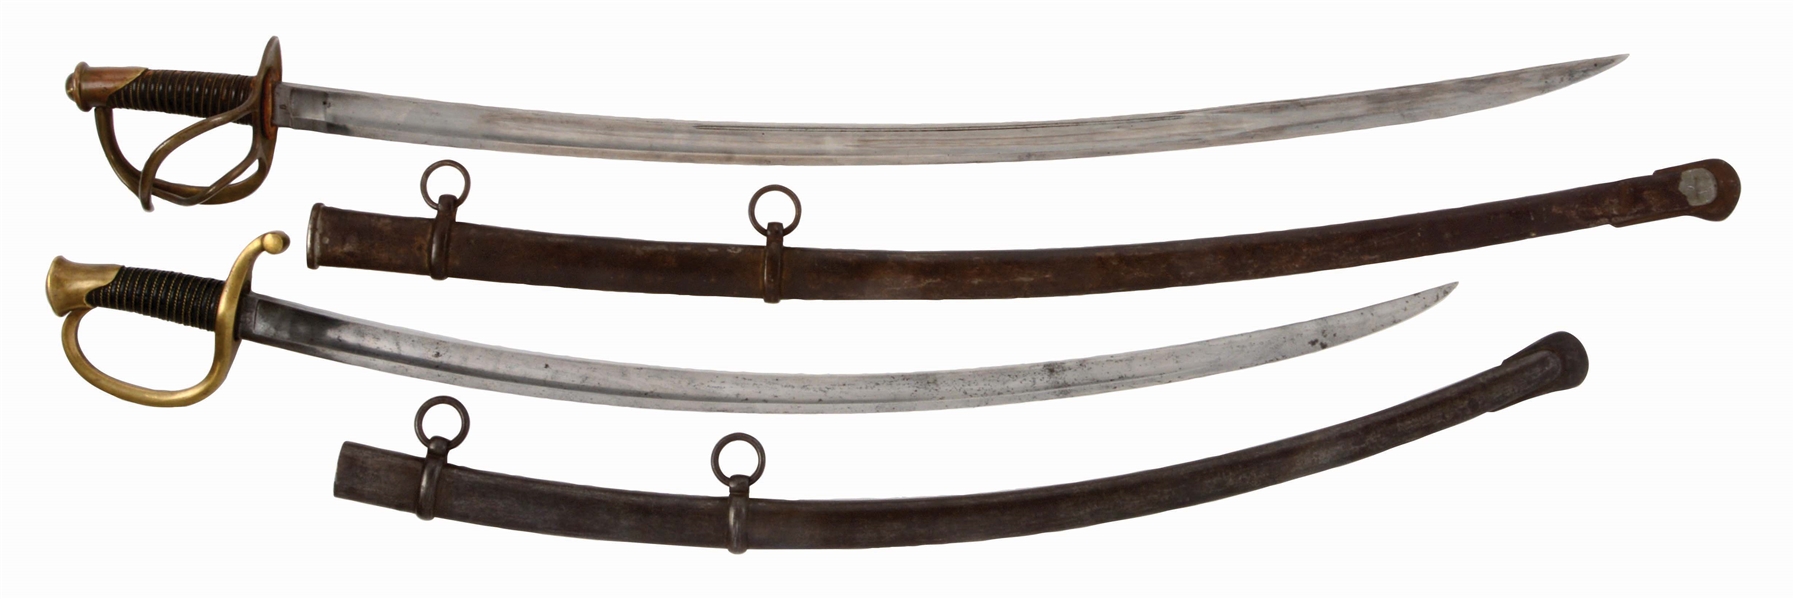 LOT OF TWO: 1840 HEAVY CAVALRY SABER AND 1840 MOUNTED ARTILLERY SABER.